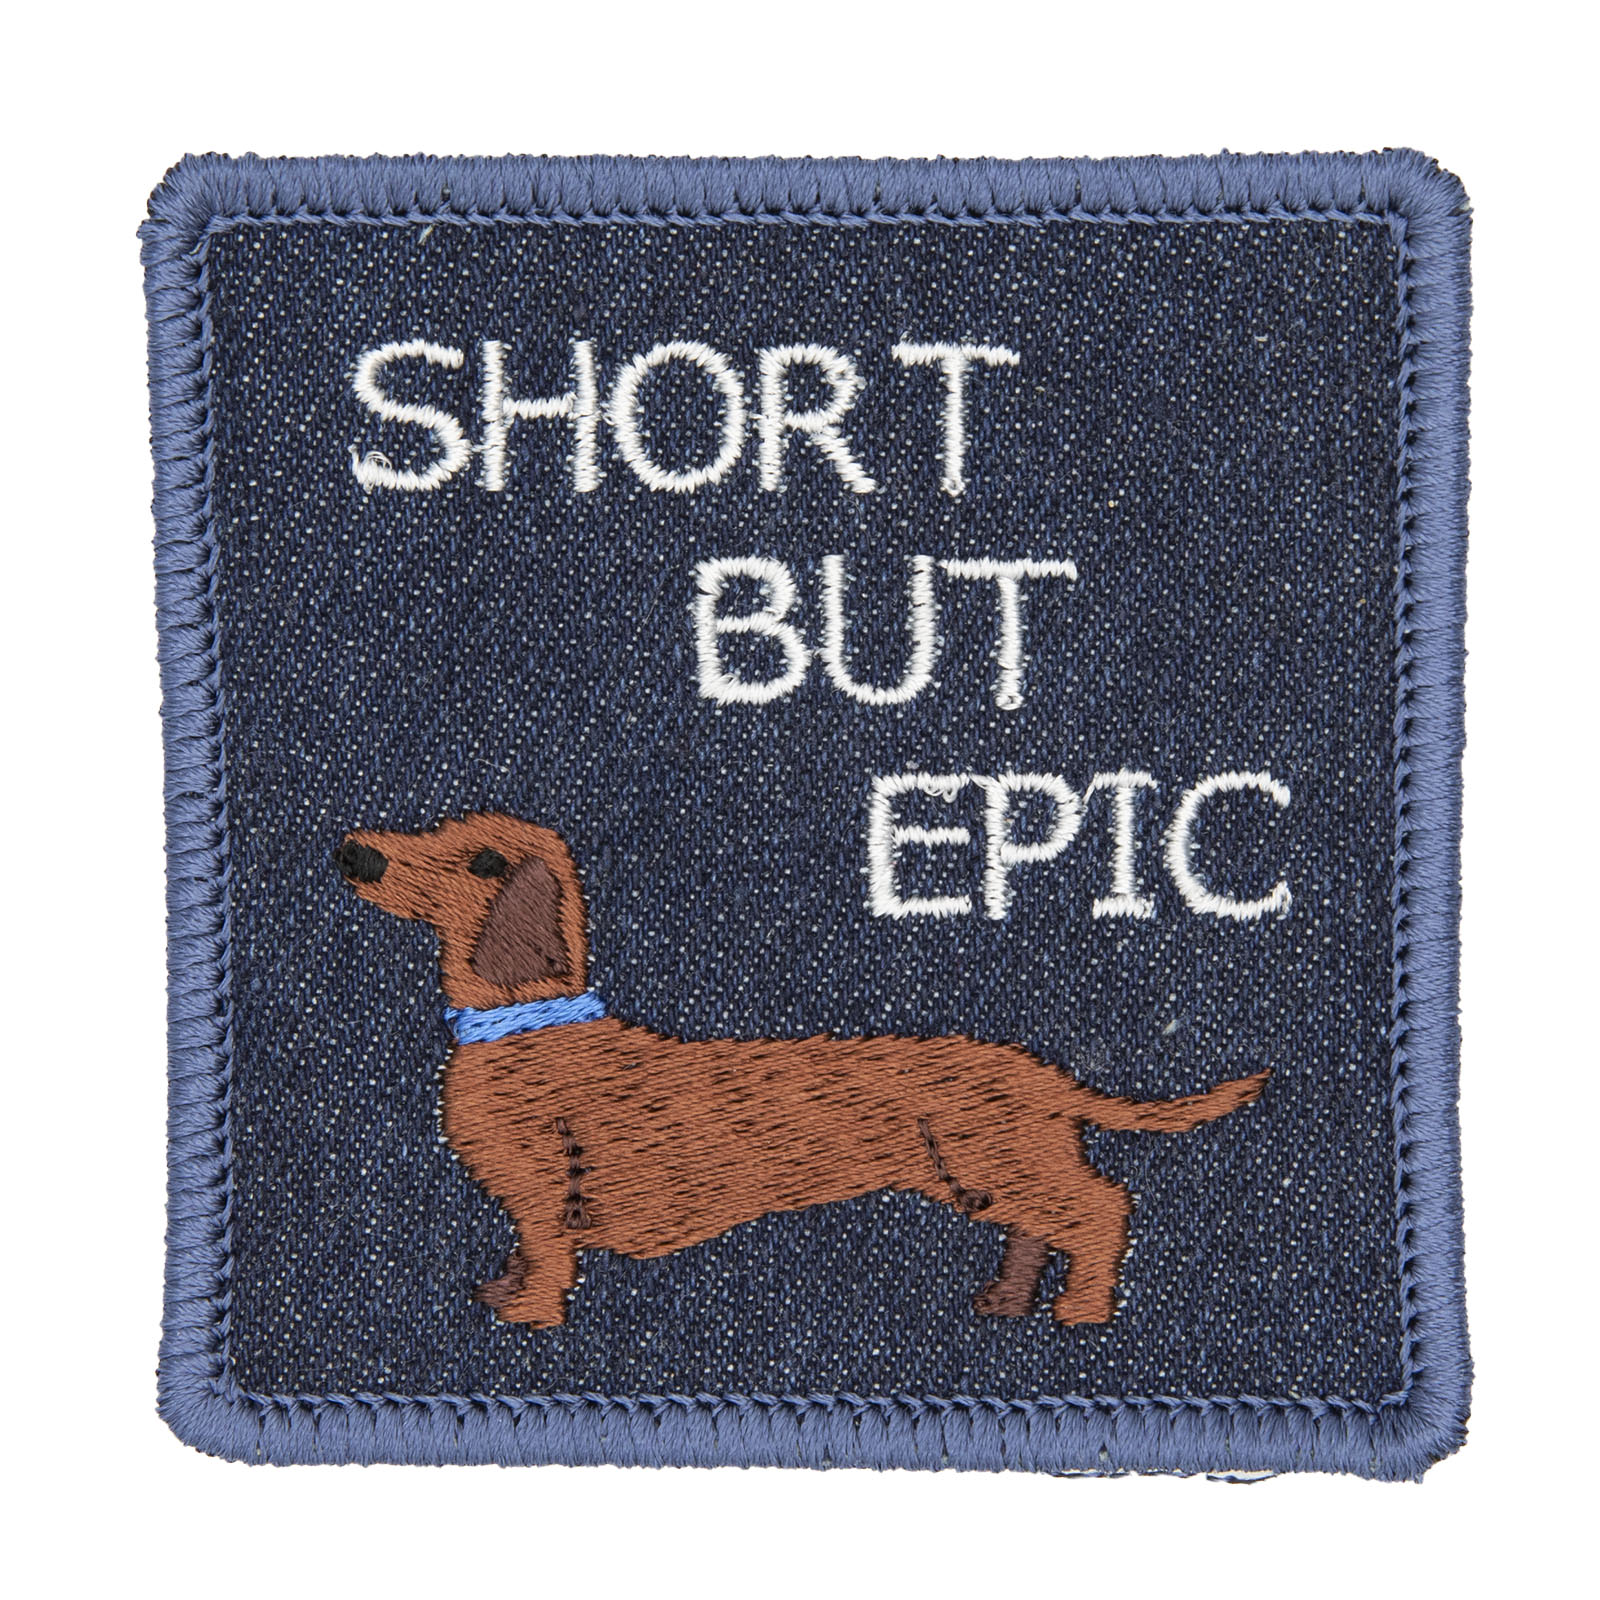 square embroidered patch picture of dachshund dog and text short but epic on blue denim